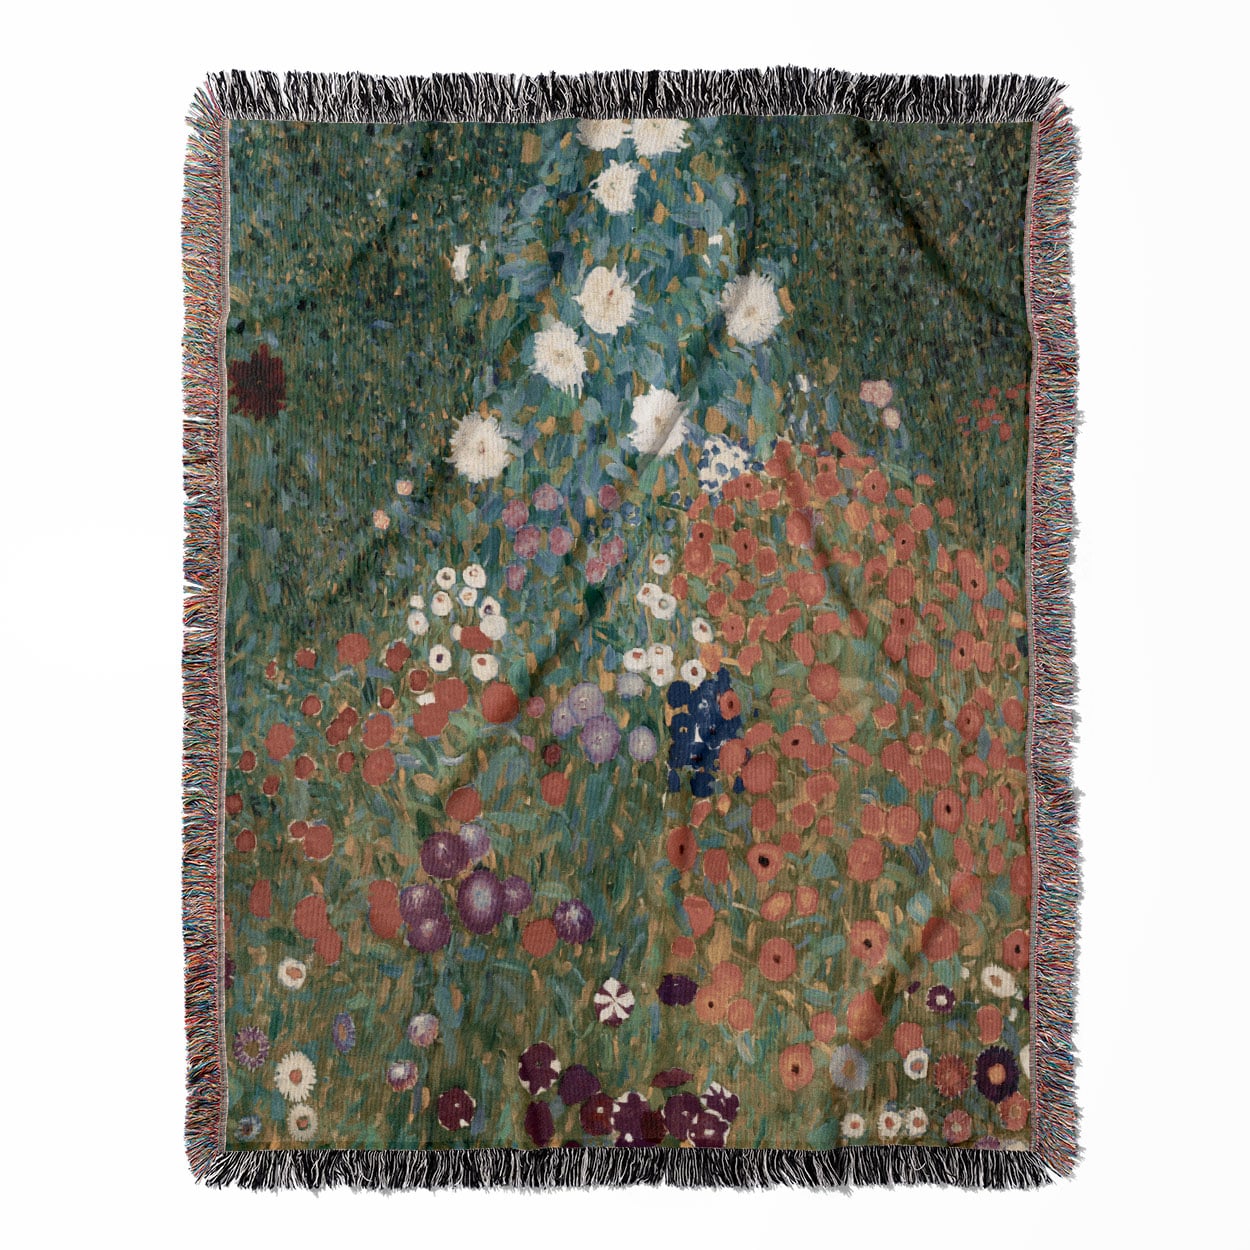 Beautiful Flowers woven throw blanket, made of 100% cotton, presenting a soft and cozy texture in a charming cottagecore style for home decor.